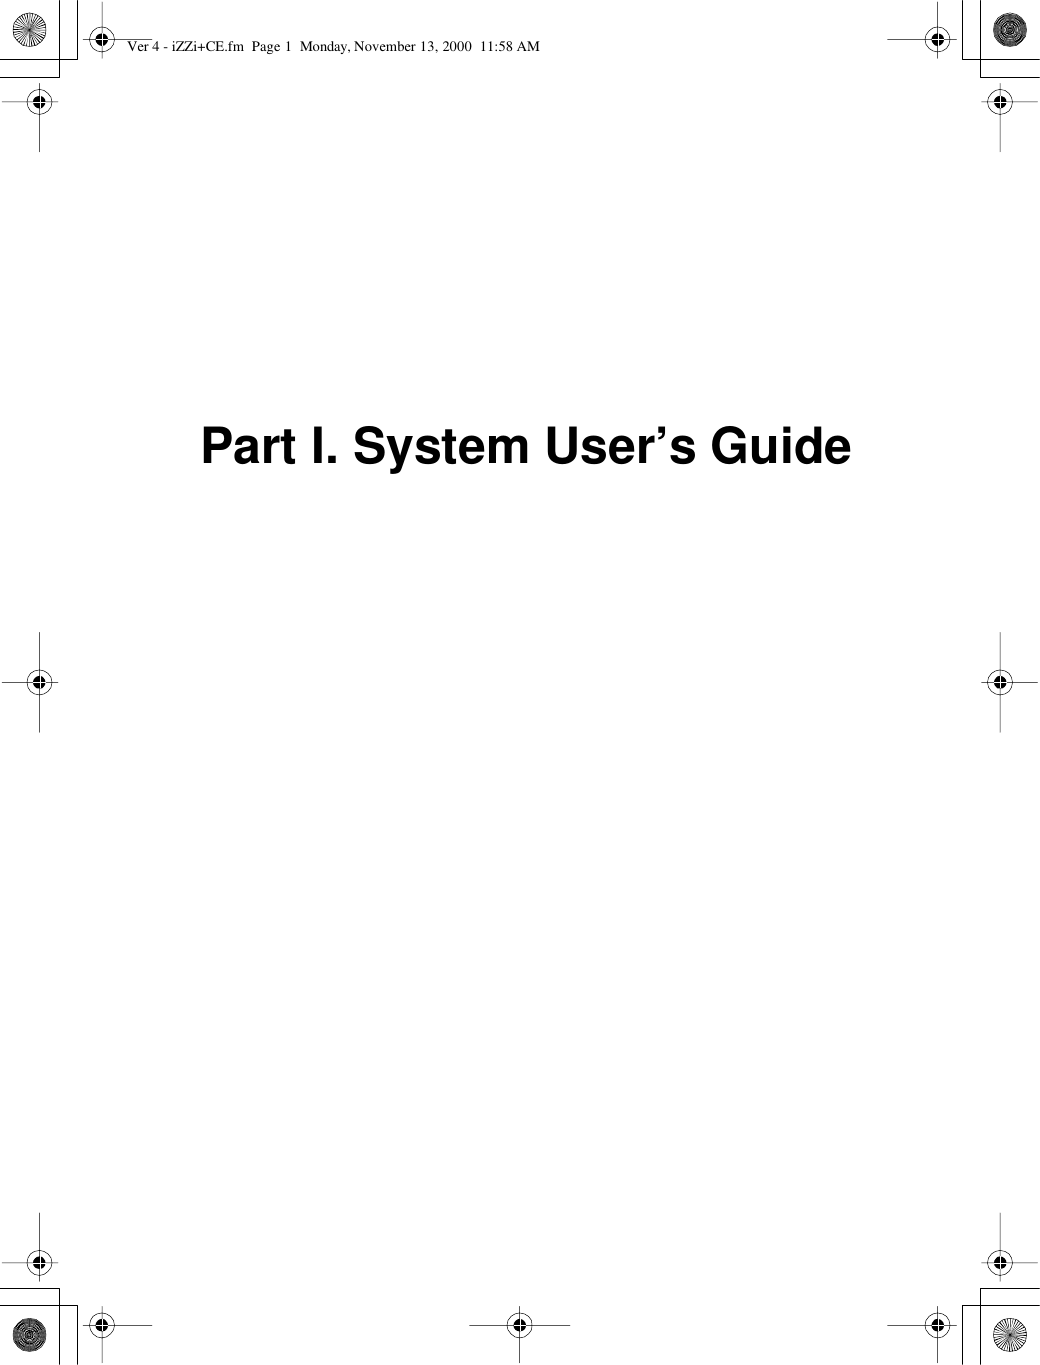 1Part I. System User’s GuideVer 4 - iZZi+CE.fm Page 1 Monday, November 13, 2000 11:58 AM